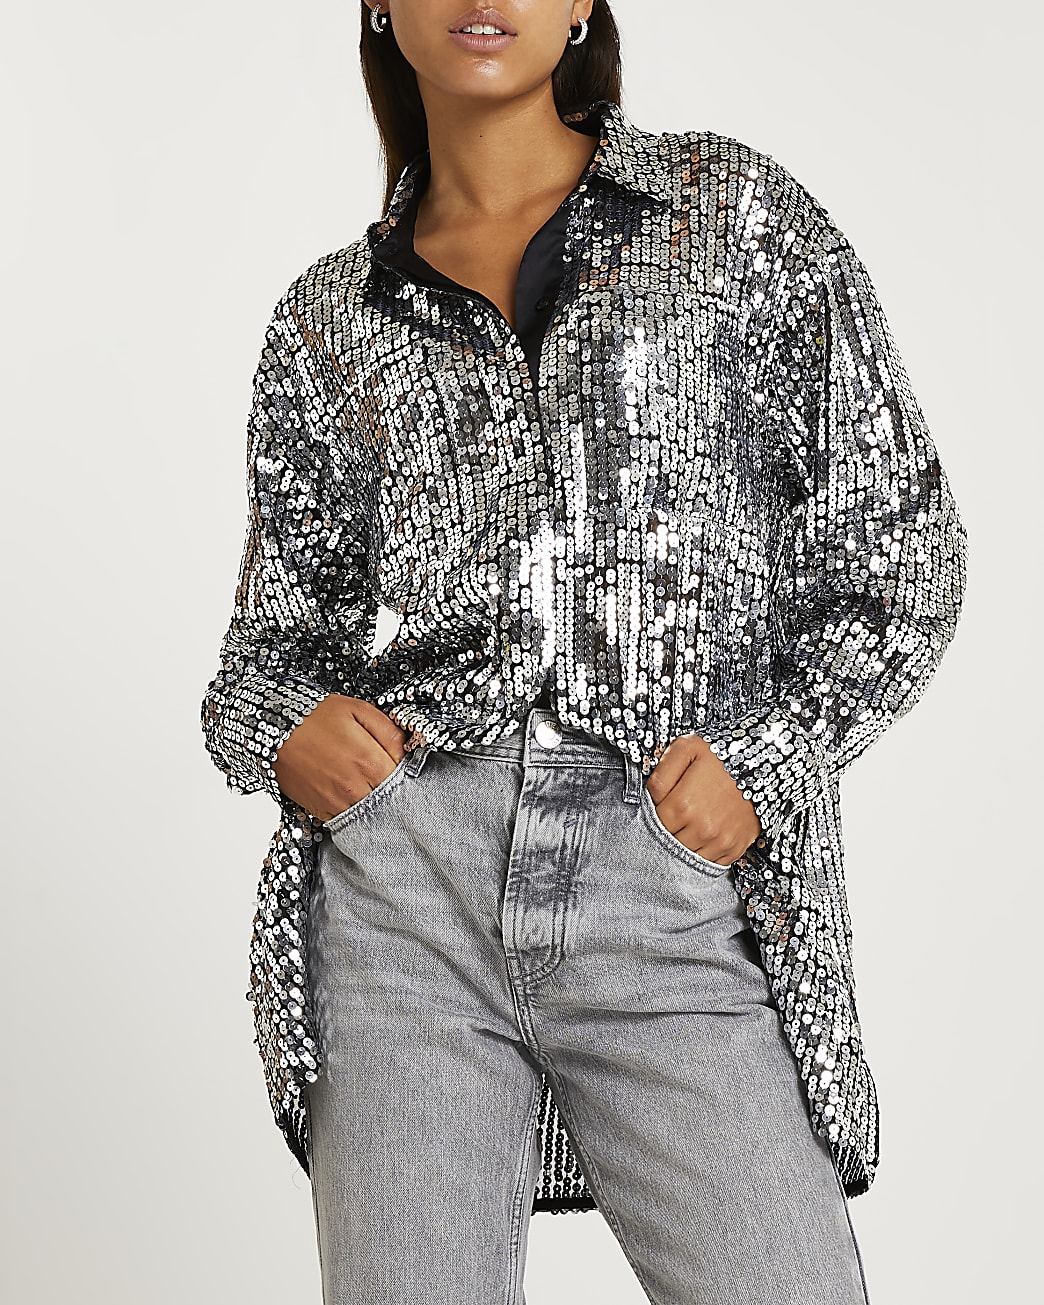 Silver sequin oversized shirt